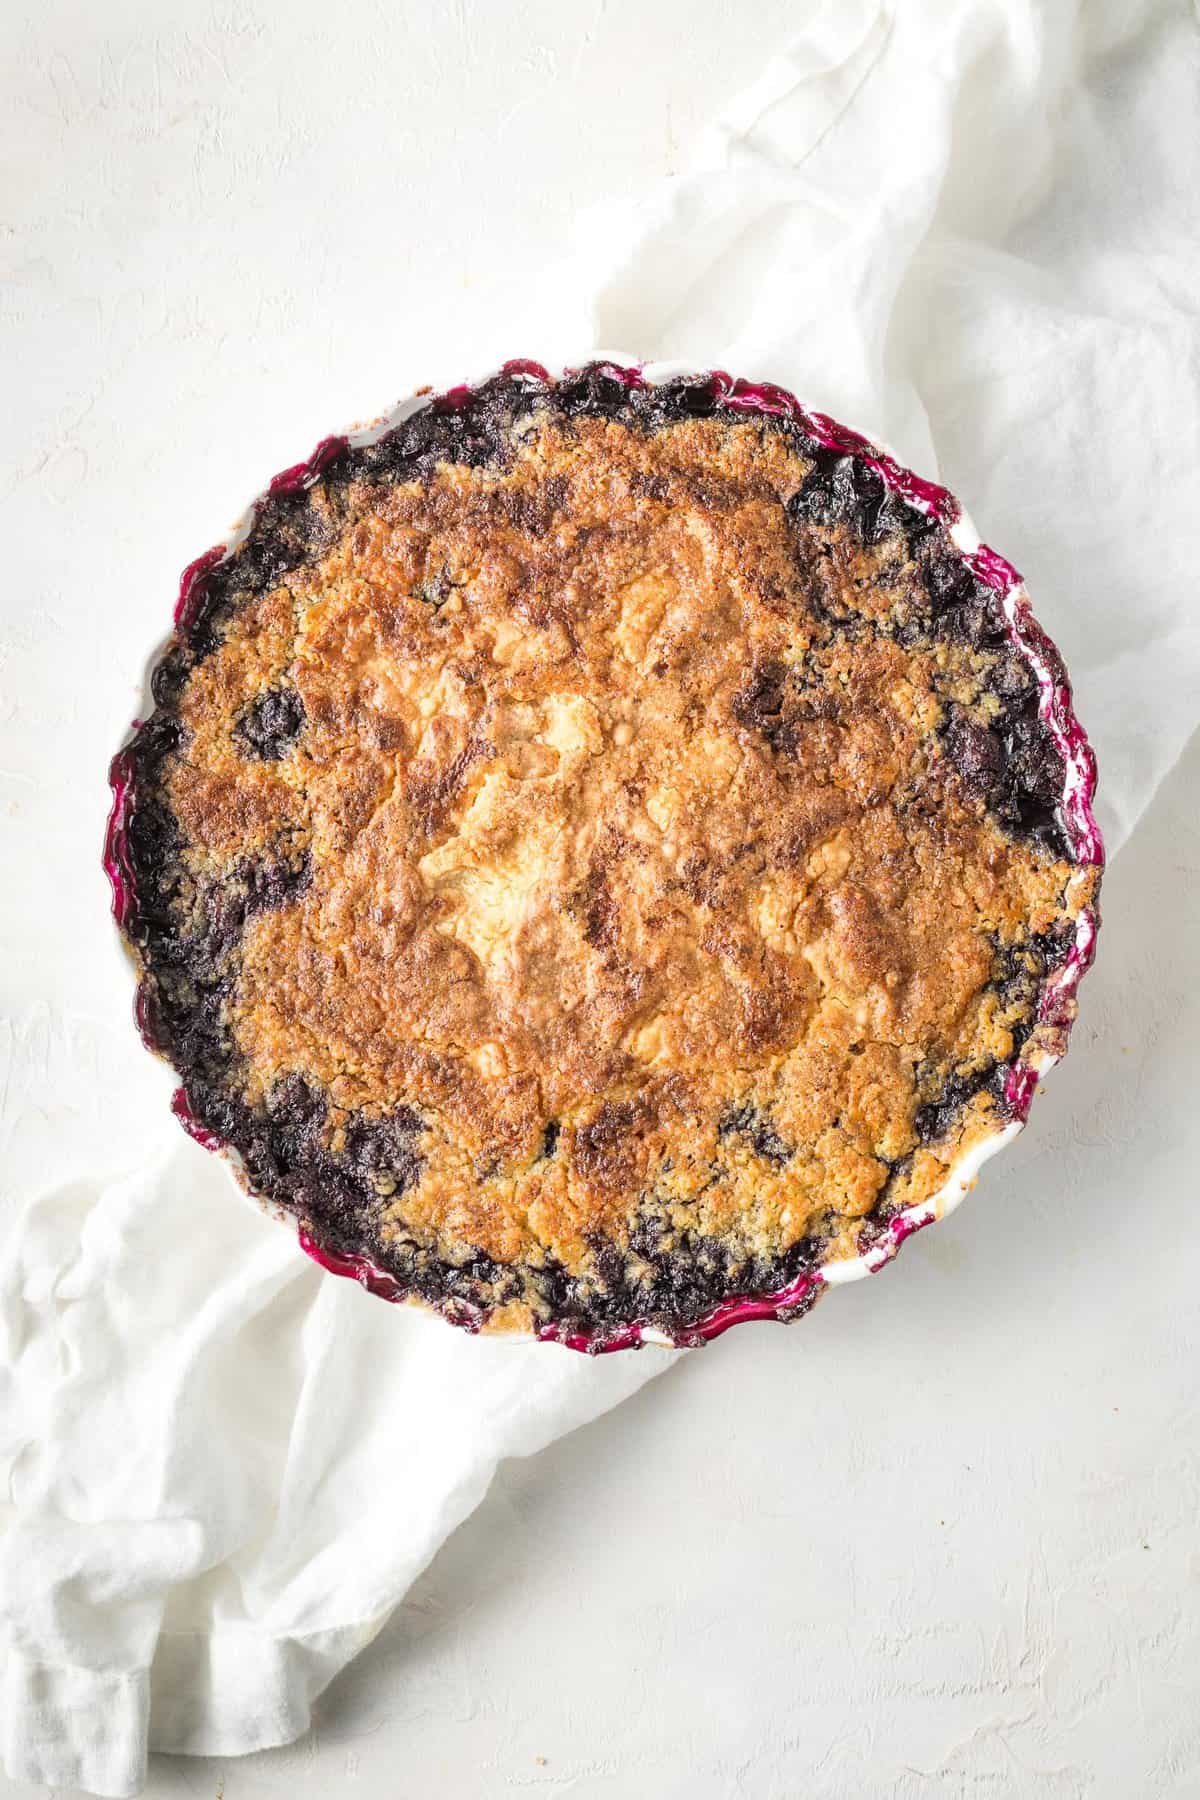 An easy blueberry cobbler in a round baking dish after baked until golden on a white background